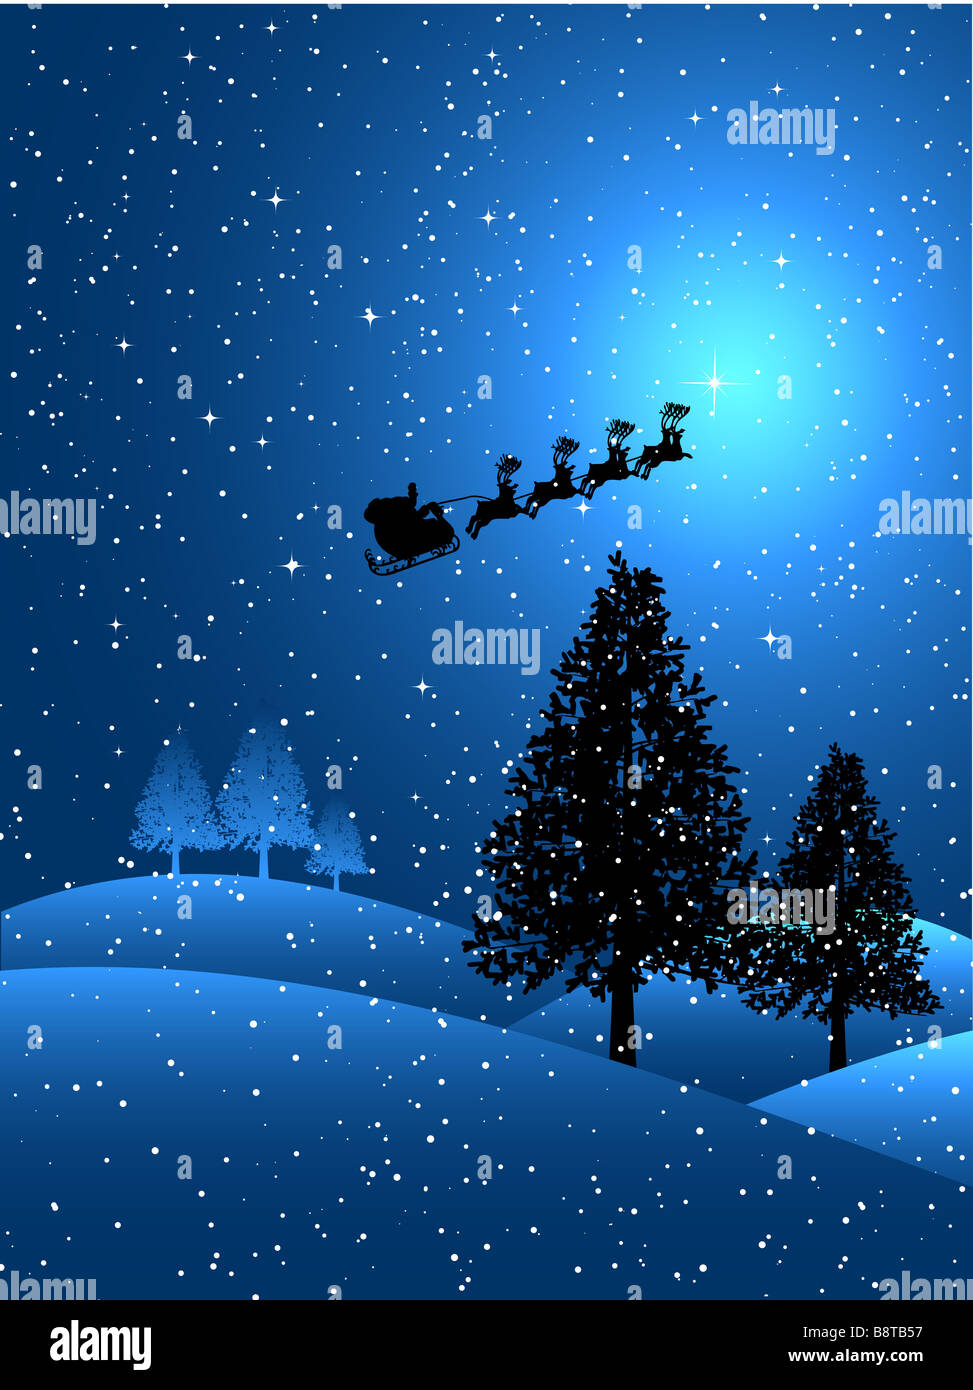 Silhouette of santa flying through the sky on a snowy night Stock Photo